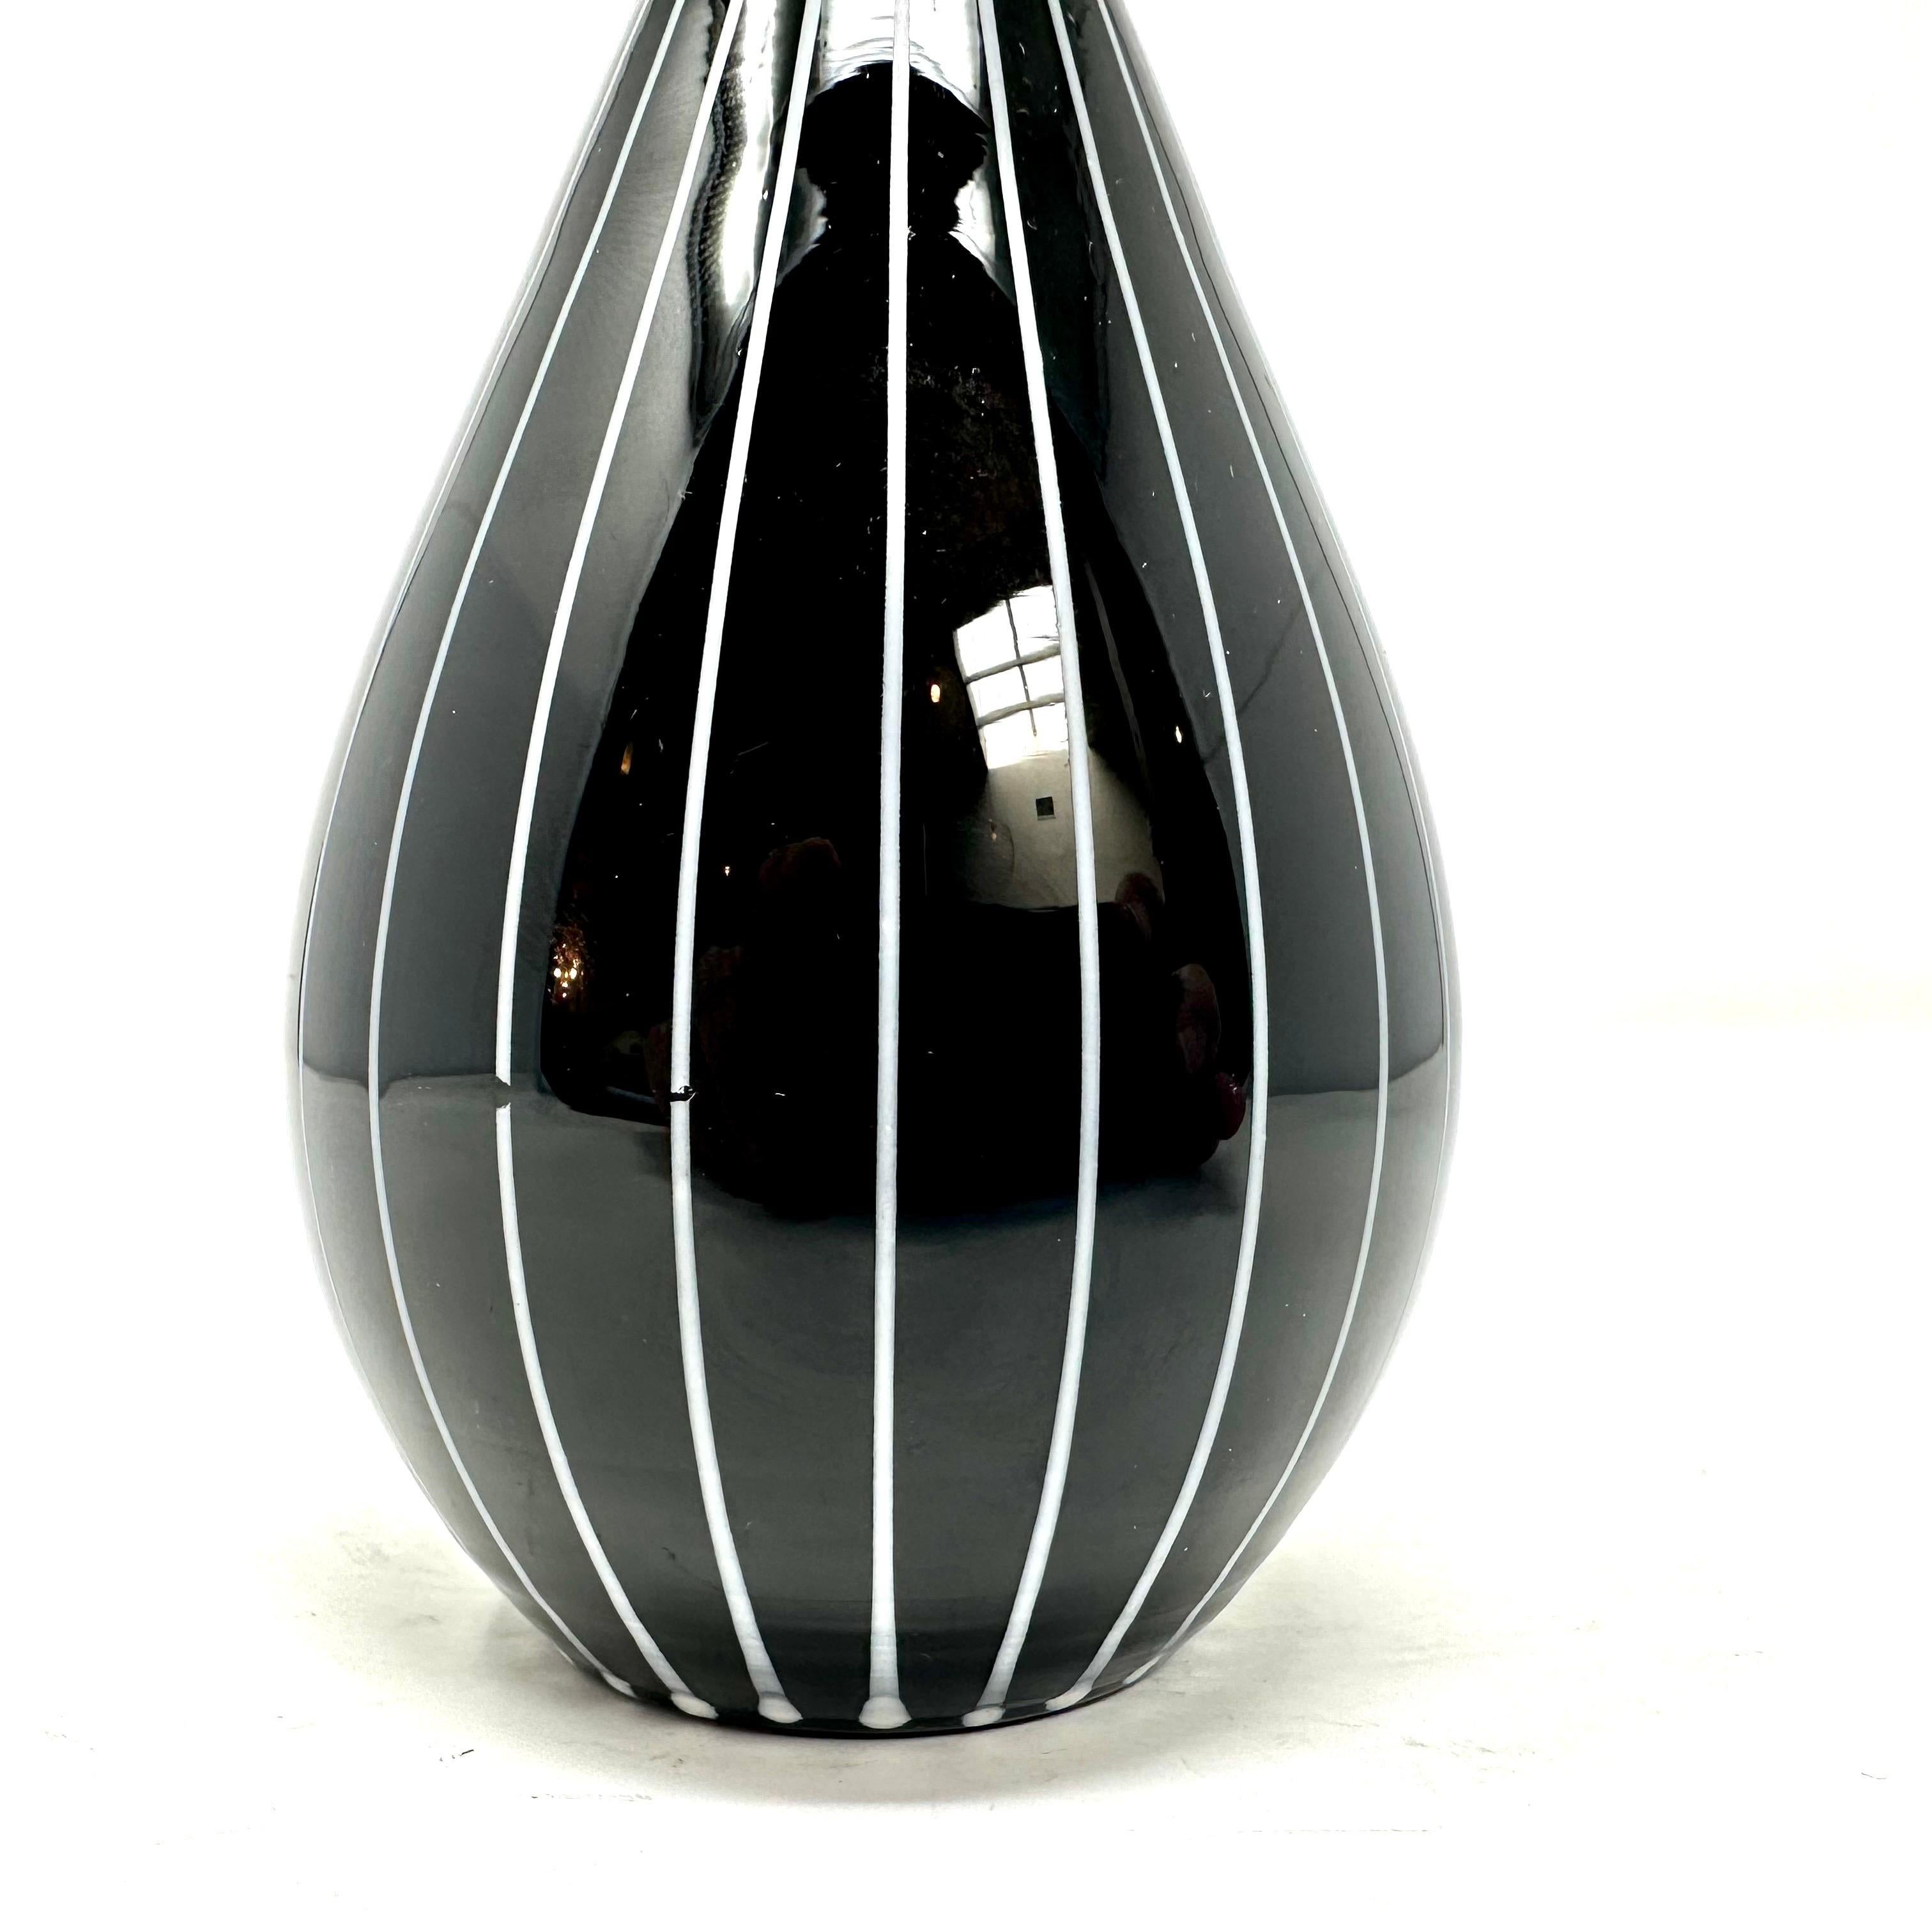 Mid-20th Century 1950s Black Striped Glass Vase by Gunnar Ander for Lindshammer